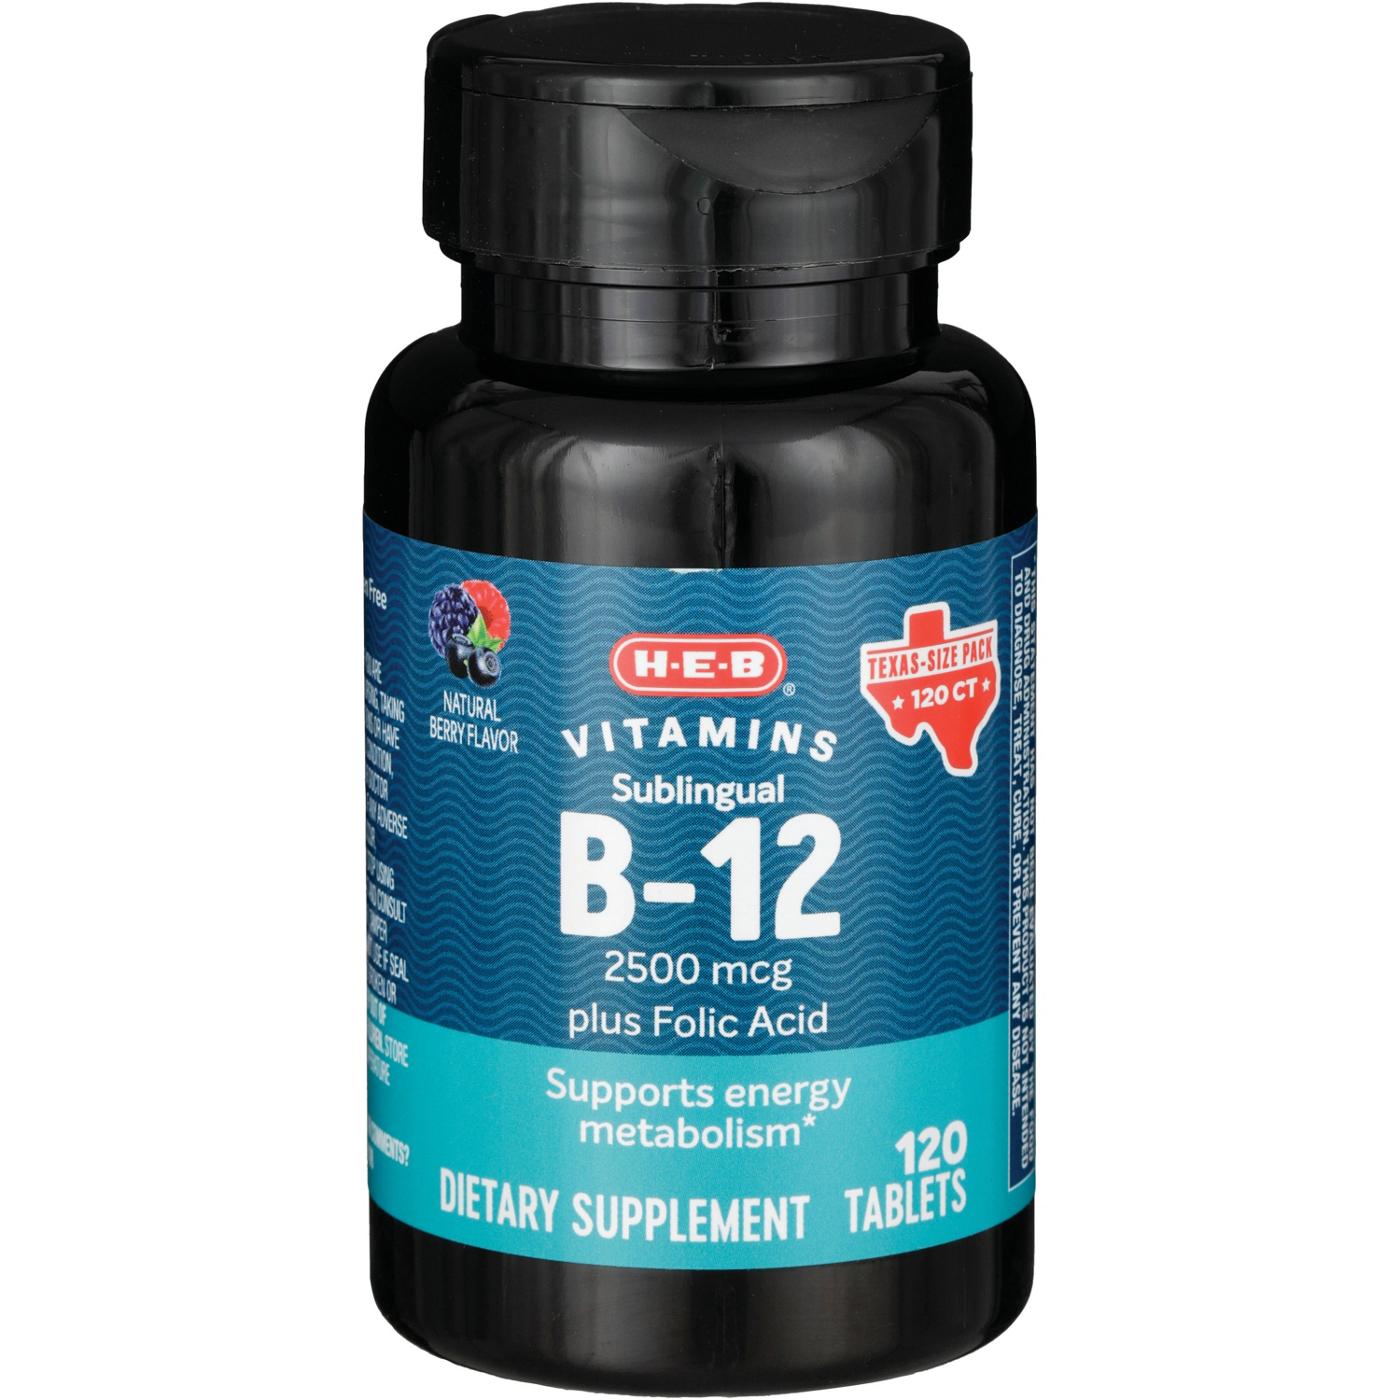 H-E-B Vitamins B-12 Sublingual 2,500 mcg Tablets - Texas-Size Pack; image 1 of 2